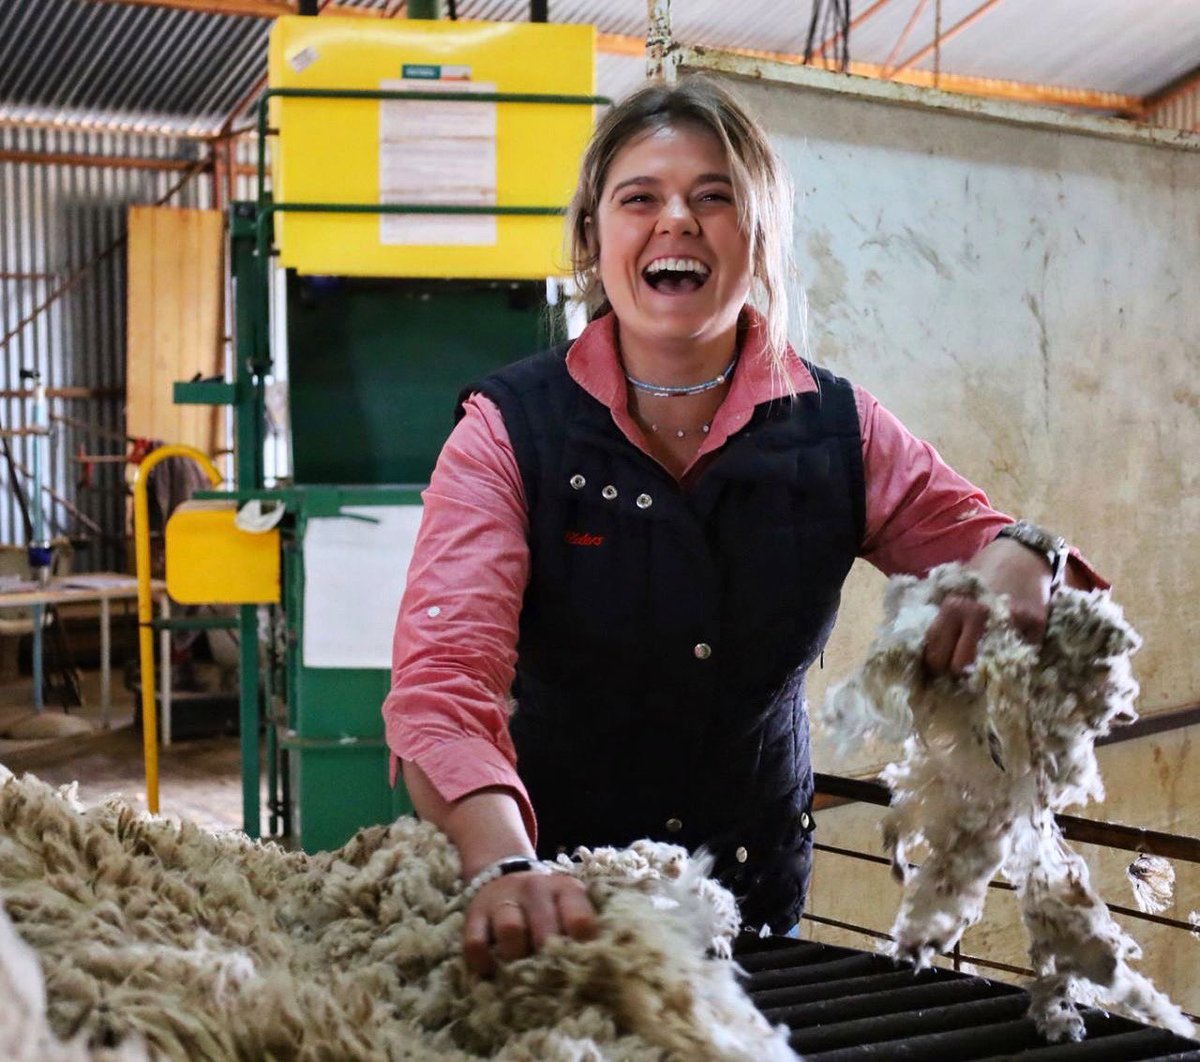 Mondays reminder to love what you do and do what you love ❤️🤍🐑 #lovewool